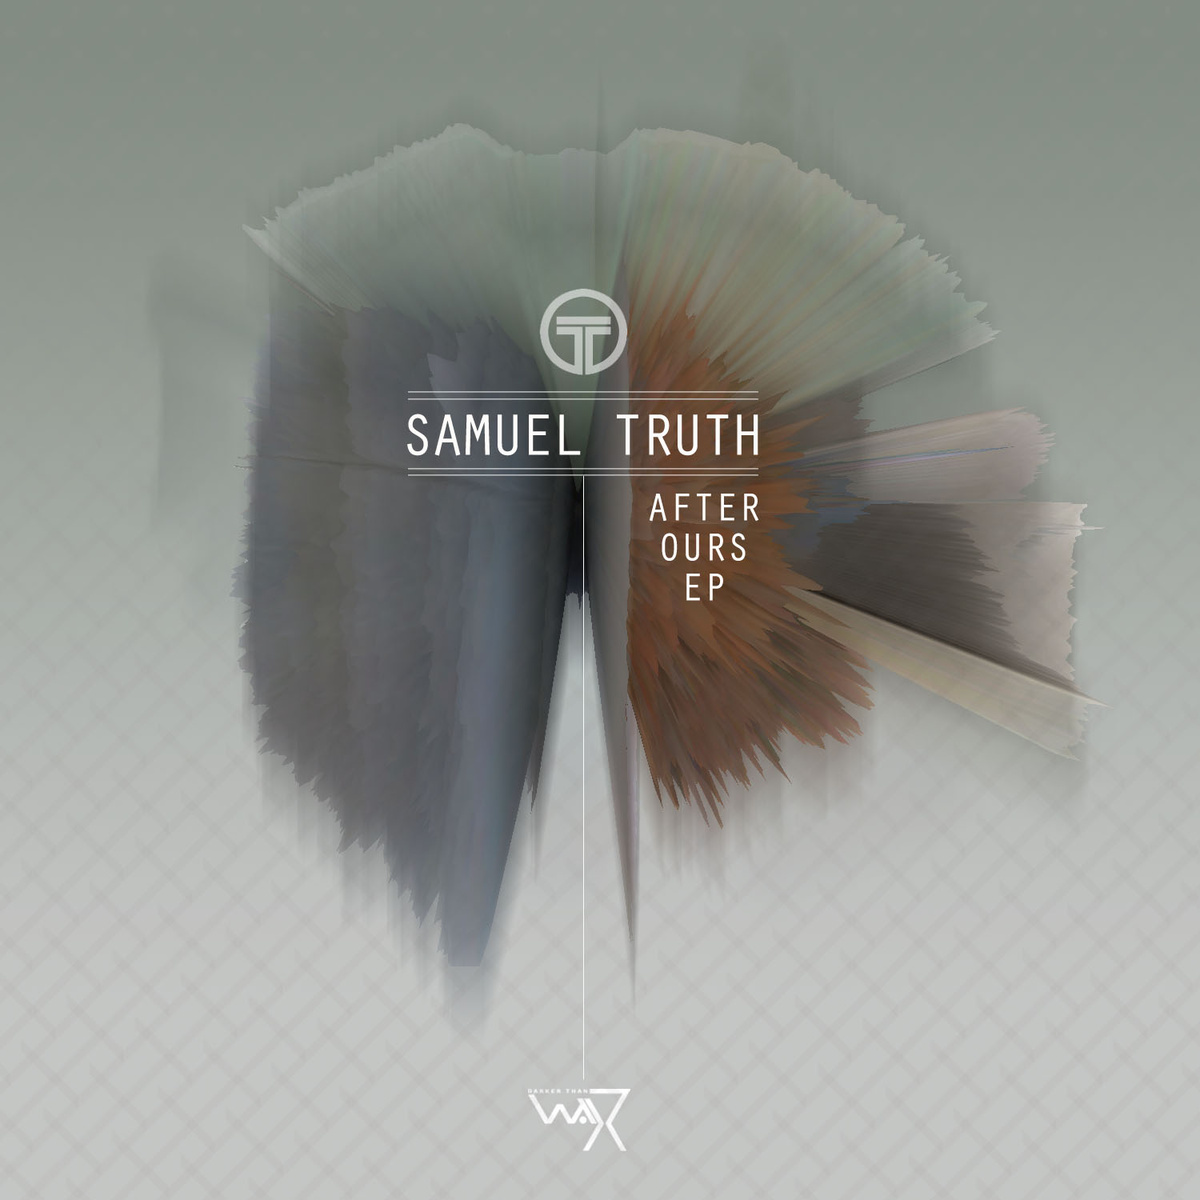 Samuel Truth "After Ours" Release | @darkerthanwax